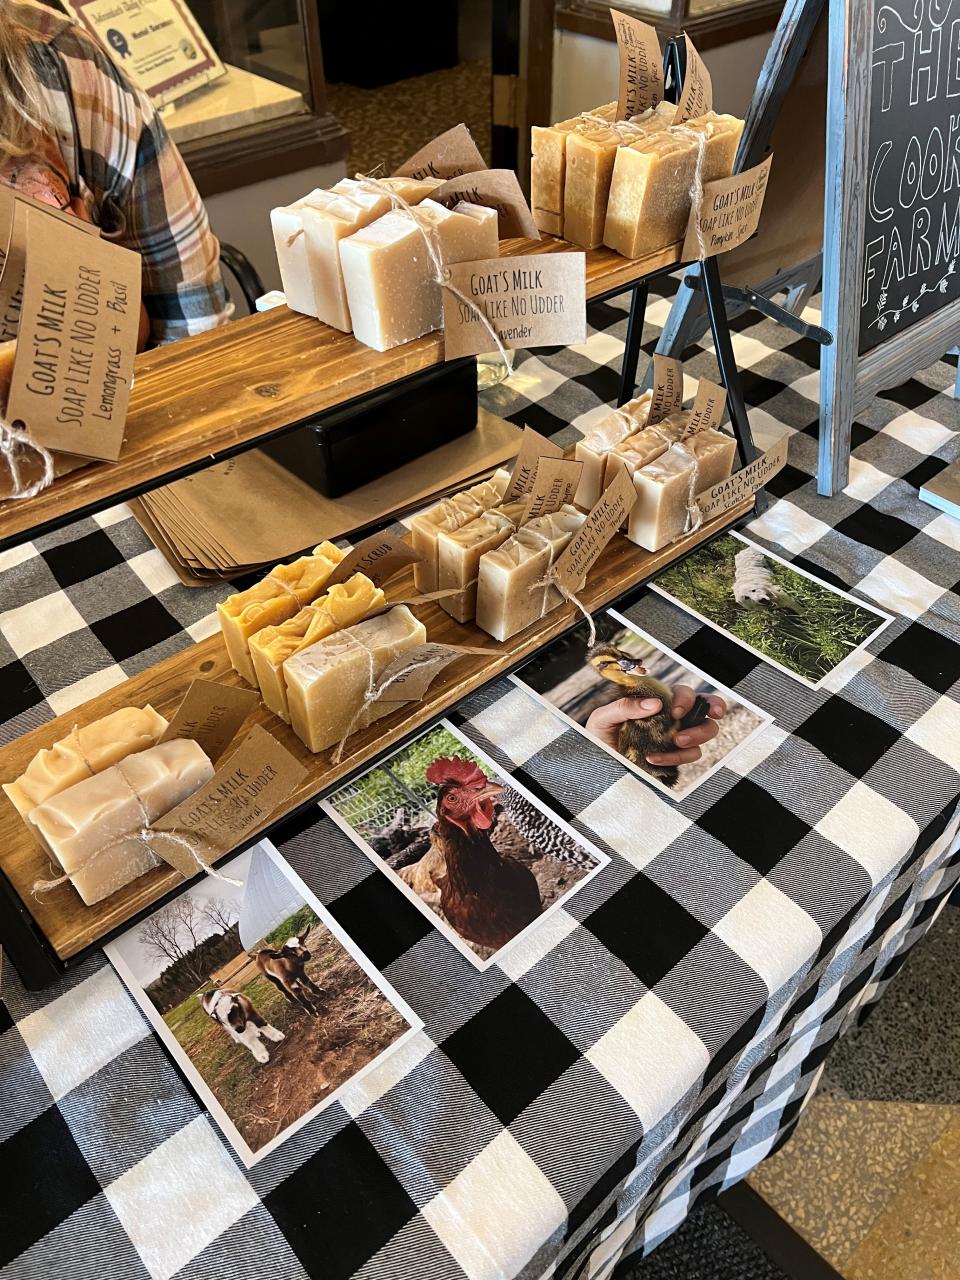 A table with a display of handmade soap.